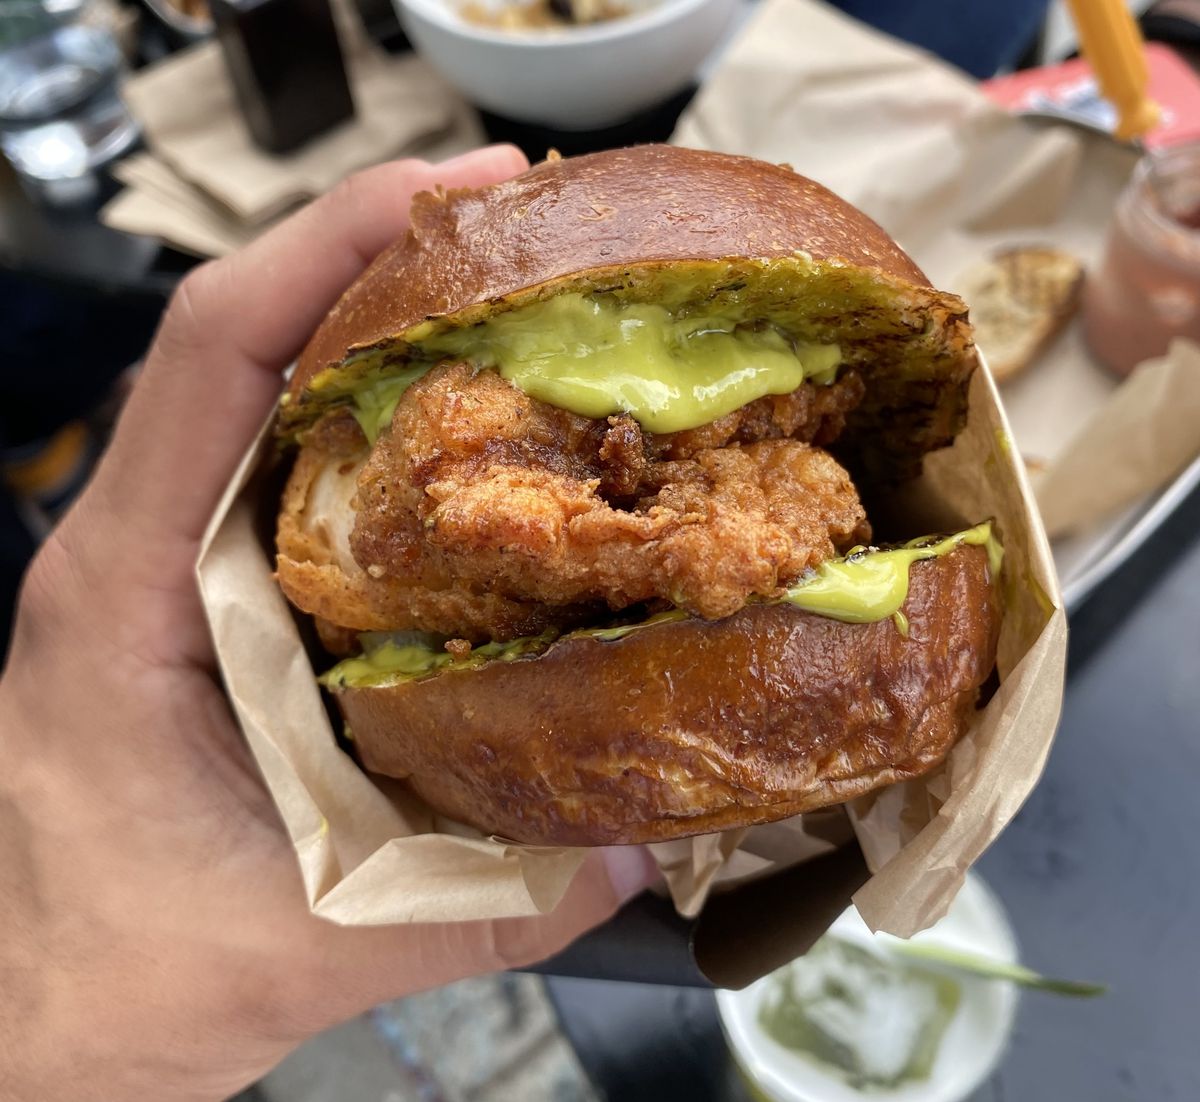 A hand holds a sandwich overflowing with green sauce and crispy chicken, in what appears to be a pretzel bun